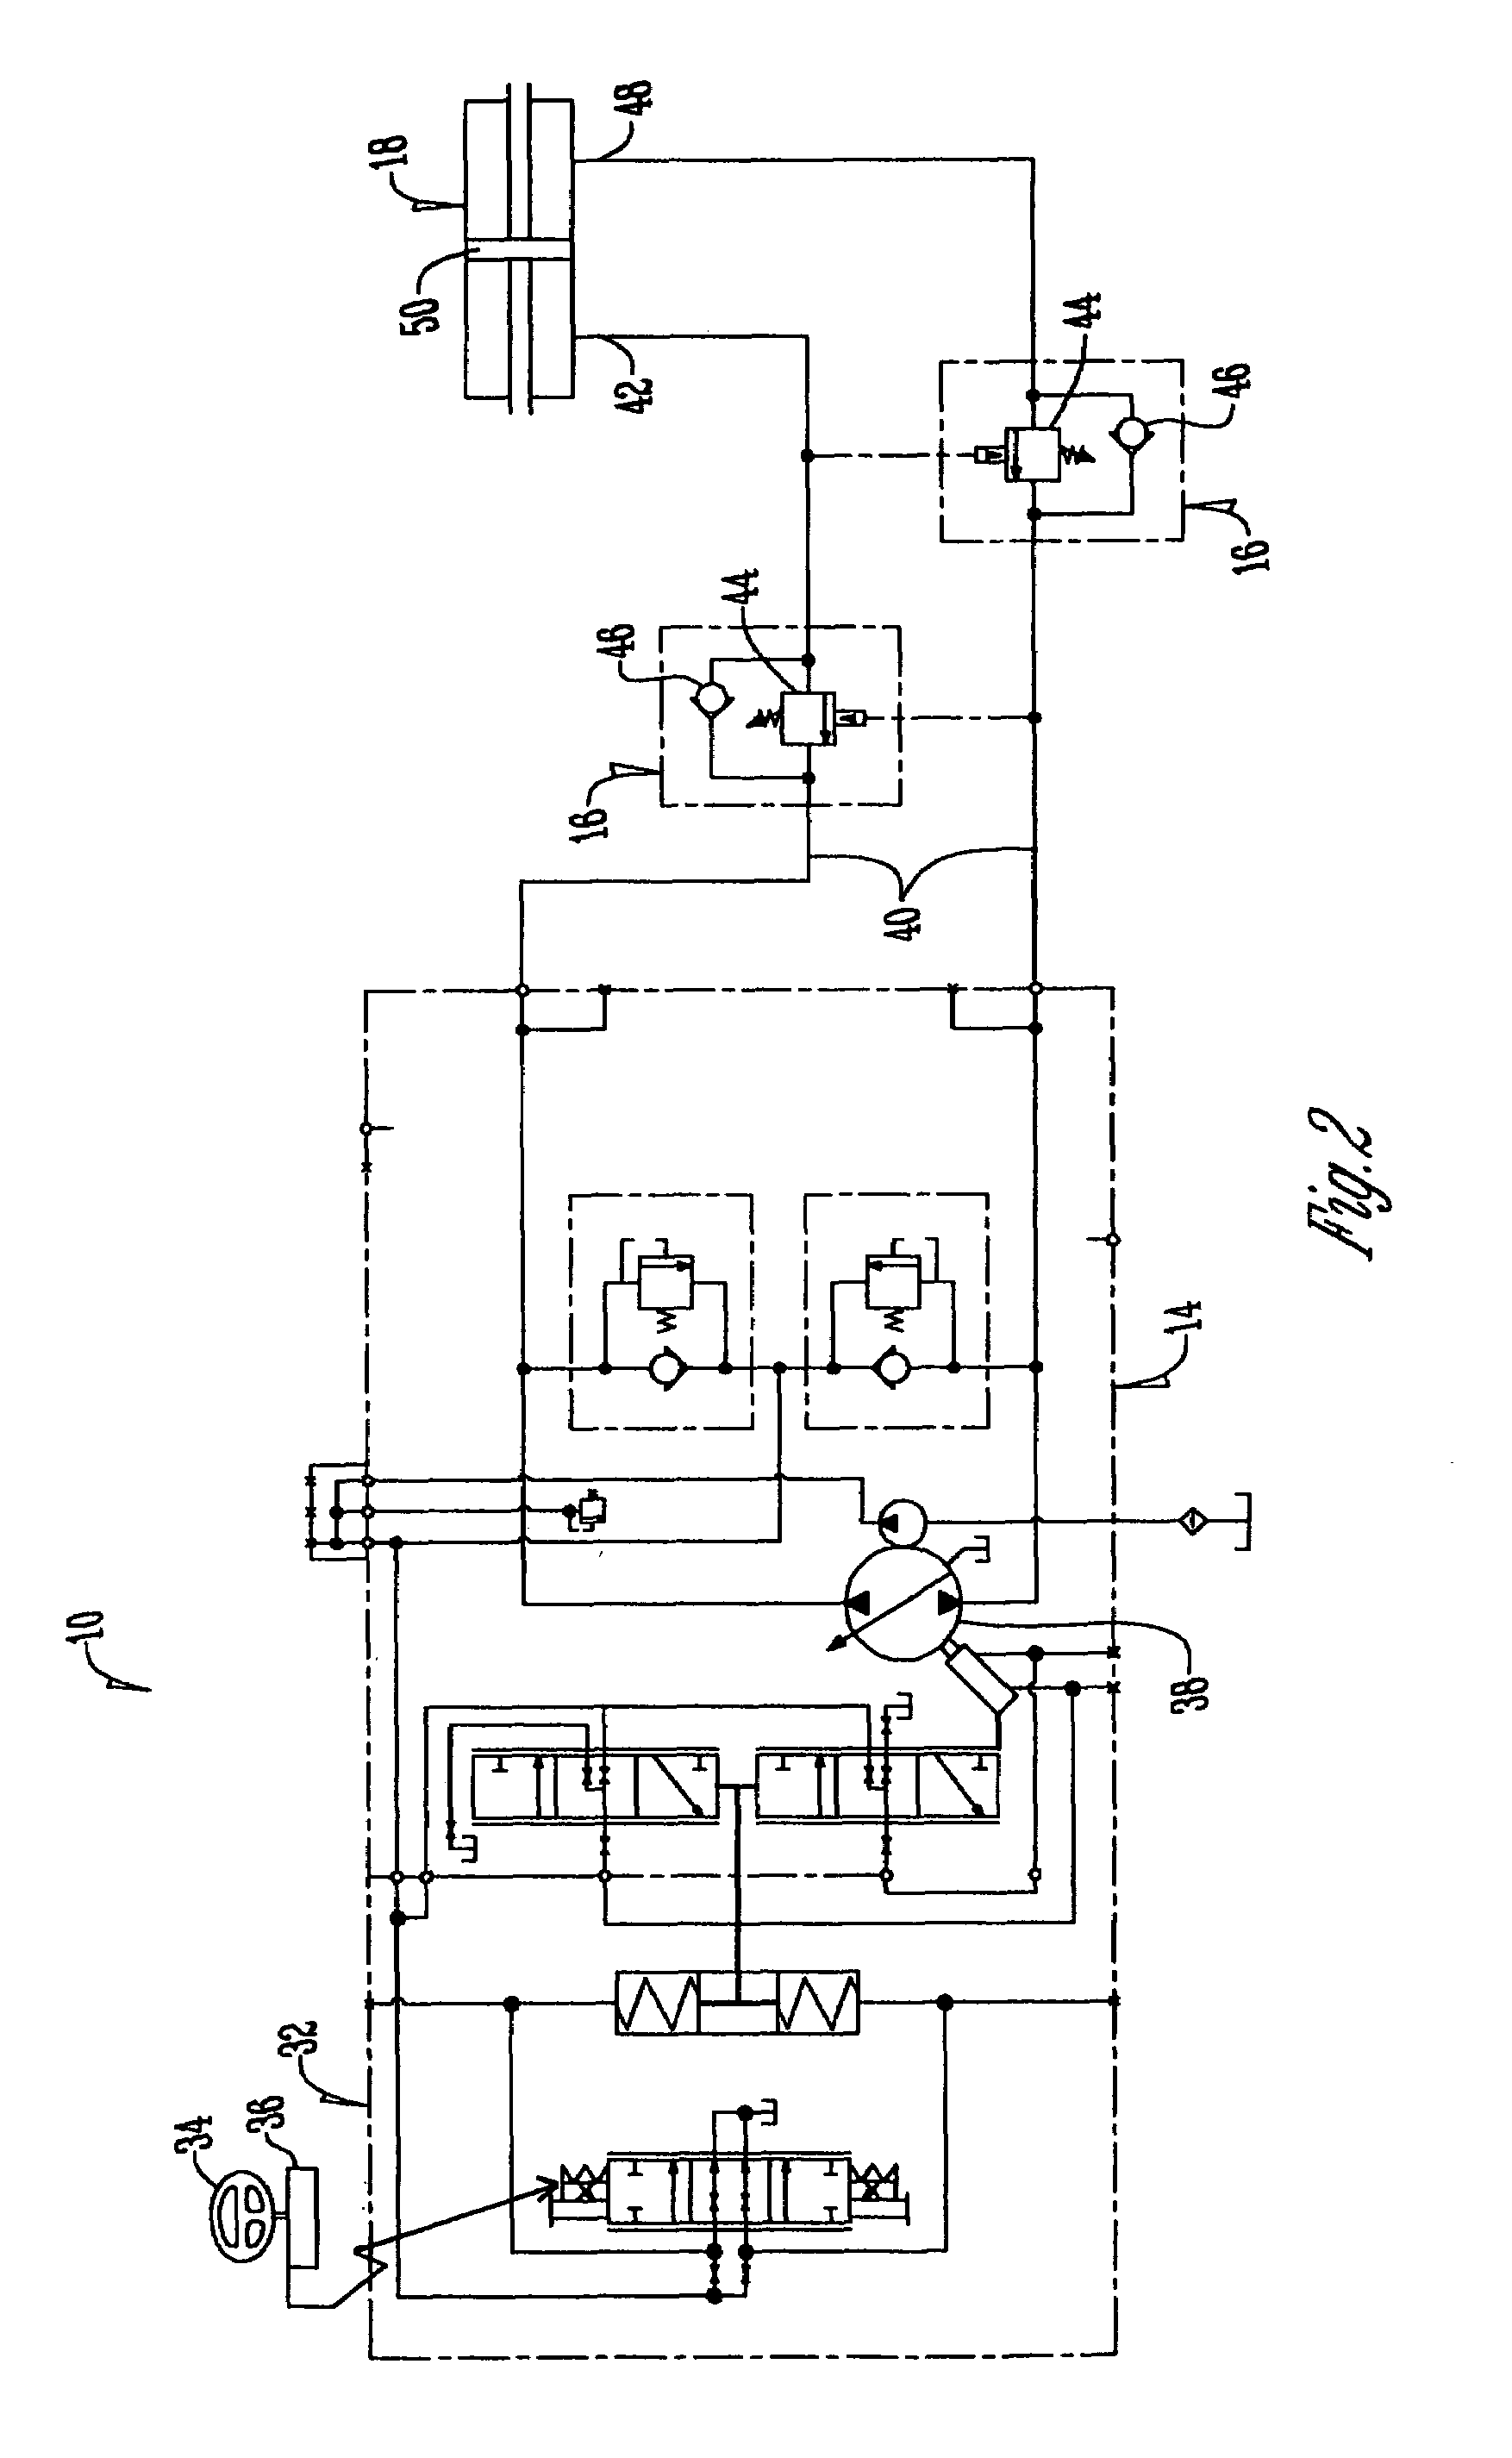 Closed circuit steering circuit for mobile vehicle